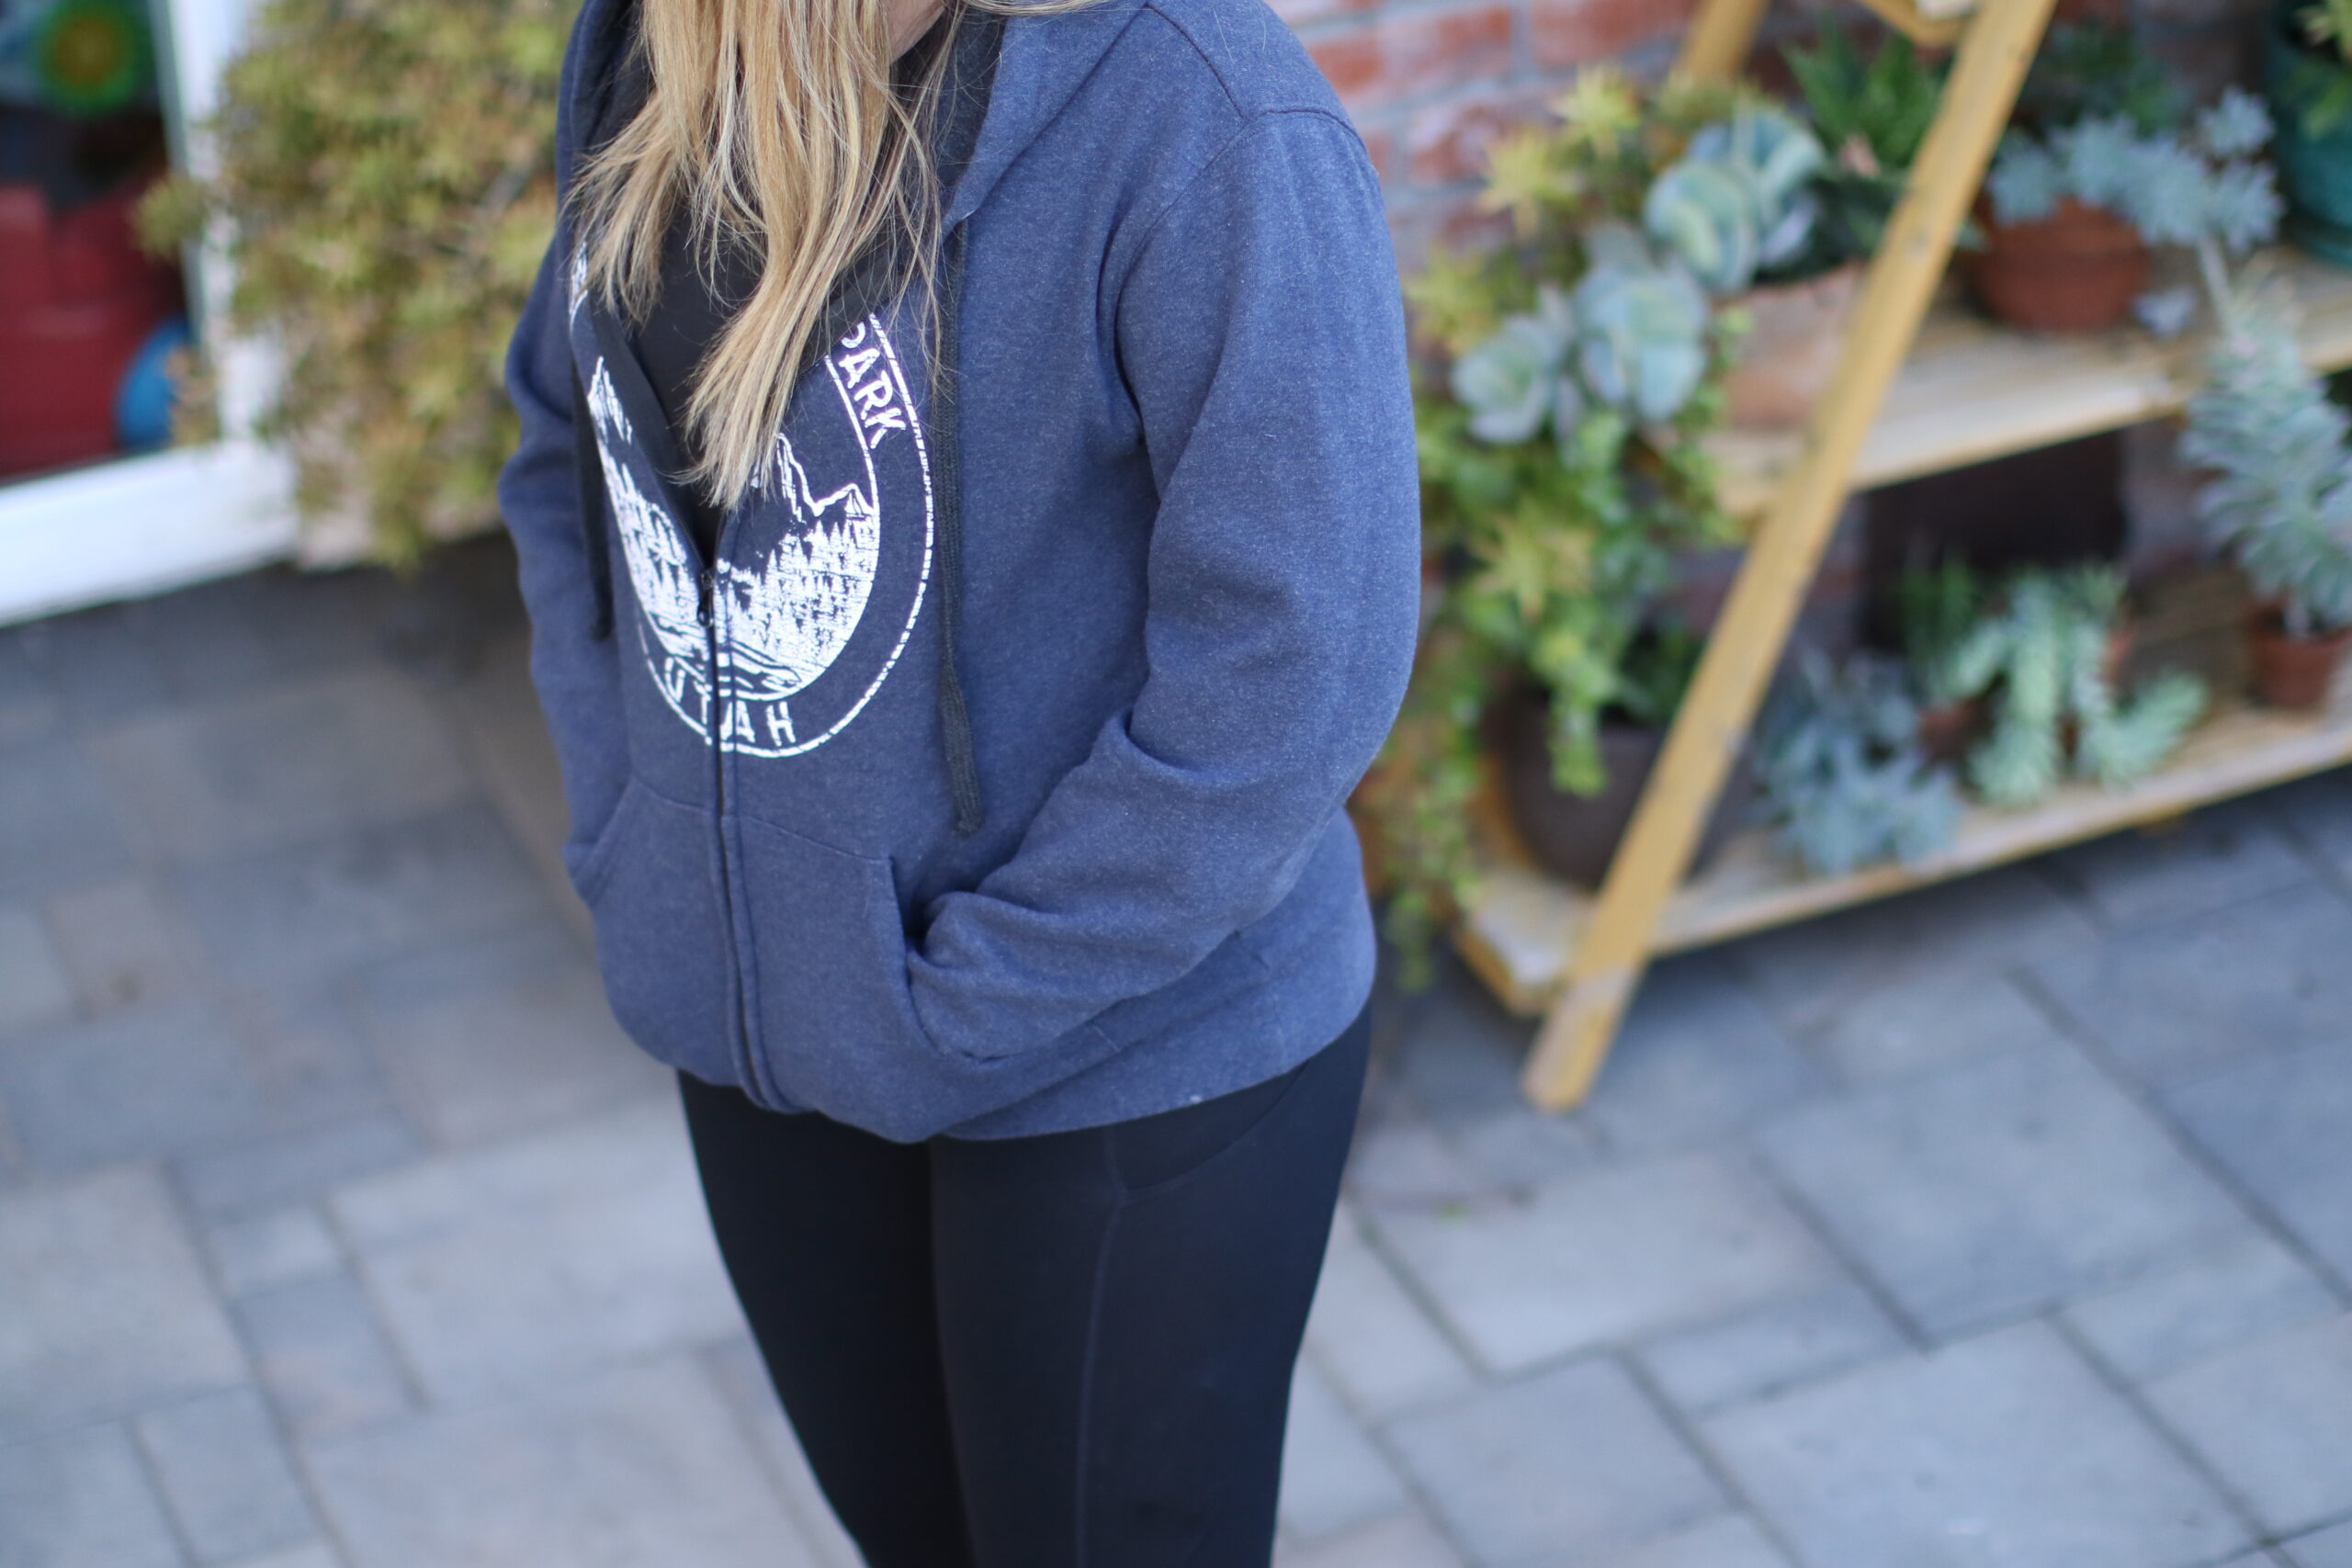 Woman wearing a blue hoodie with her hands in the sweatshirt pockets standing outside on gray pavers in the backyard